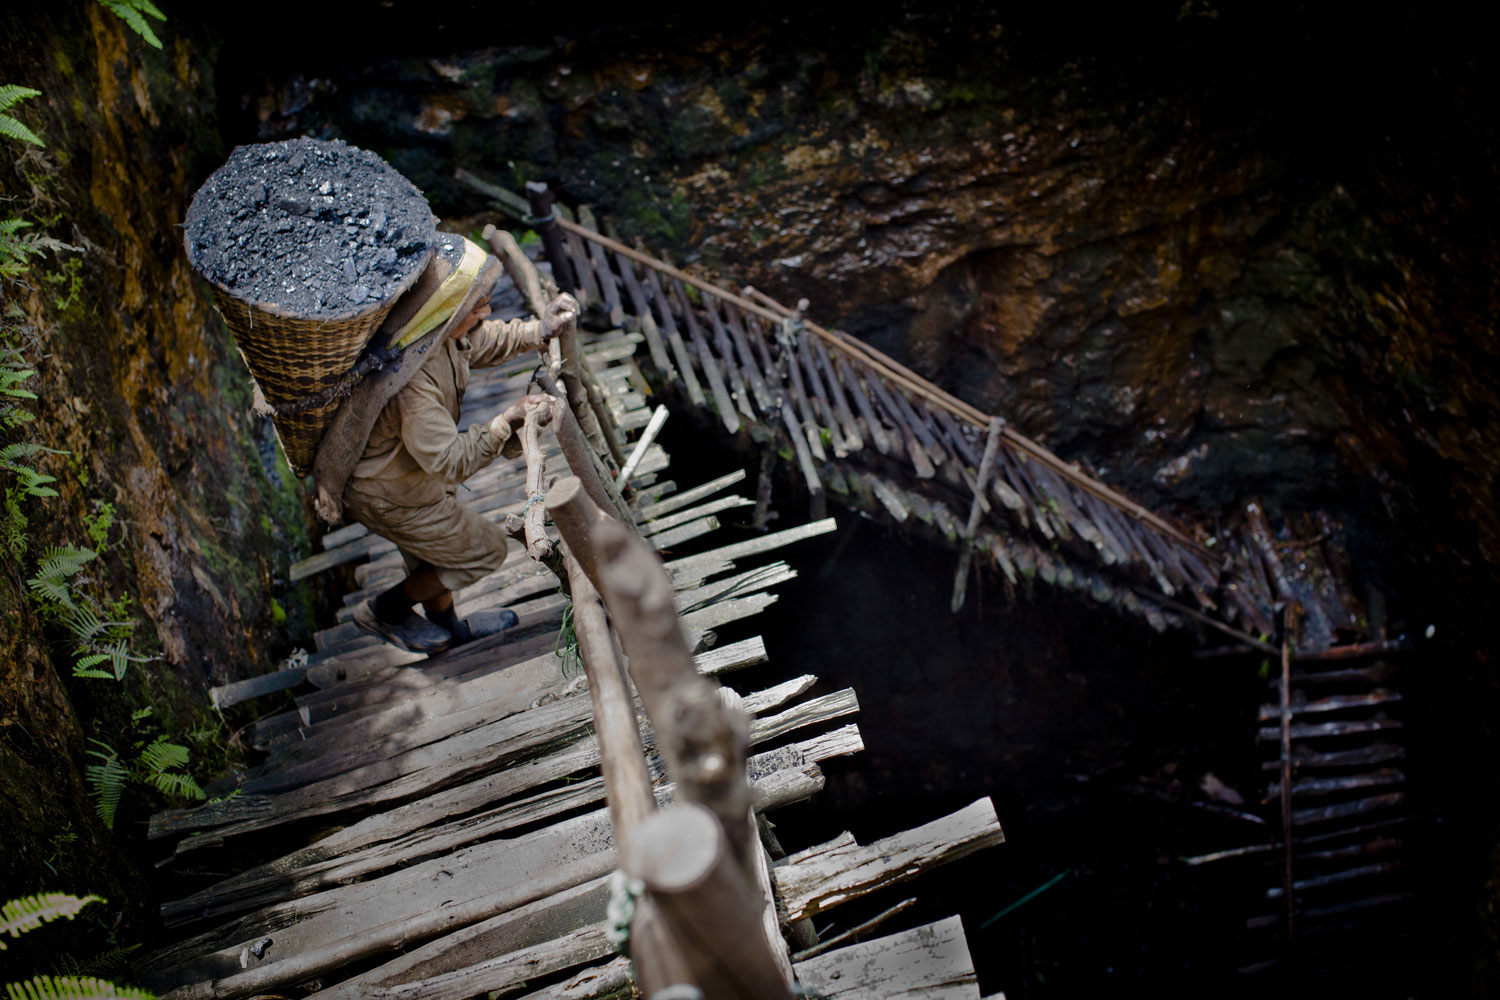 Prabhat Sinha, from Assam, carries a load of coal weighing 60kg's, supported by a head-strap, as he ascends the staircase of a coal mine near the village of Khliehriat, in the district of Jaintia Hills, India.  miners descend to great depths on slippery, rickety wooden ladders. Children and adults squeeze into rat hole like tunnels in thousands of privately owned and unregulated mines, extracting coal with their hands or primitive tools and no safety equipment.